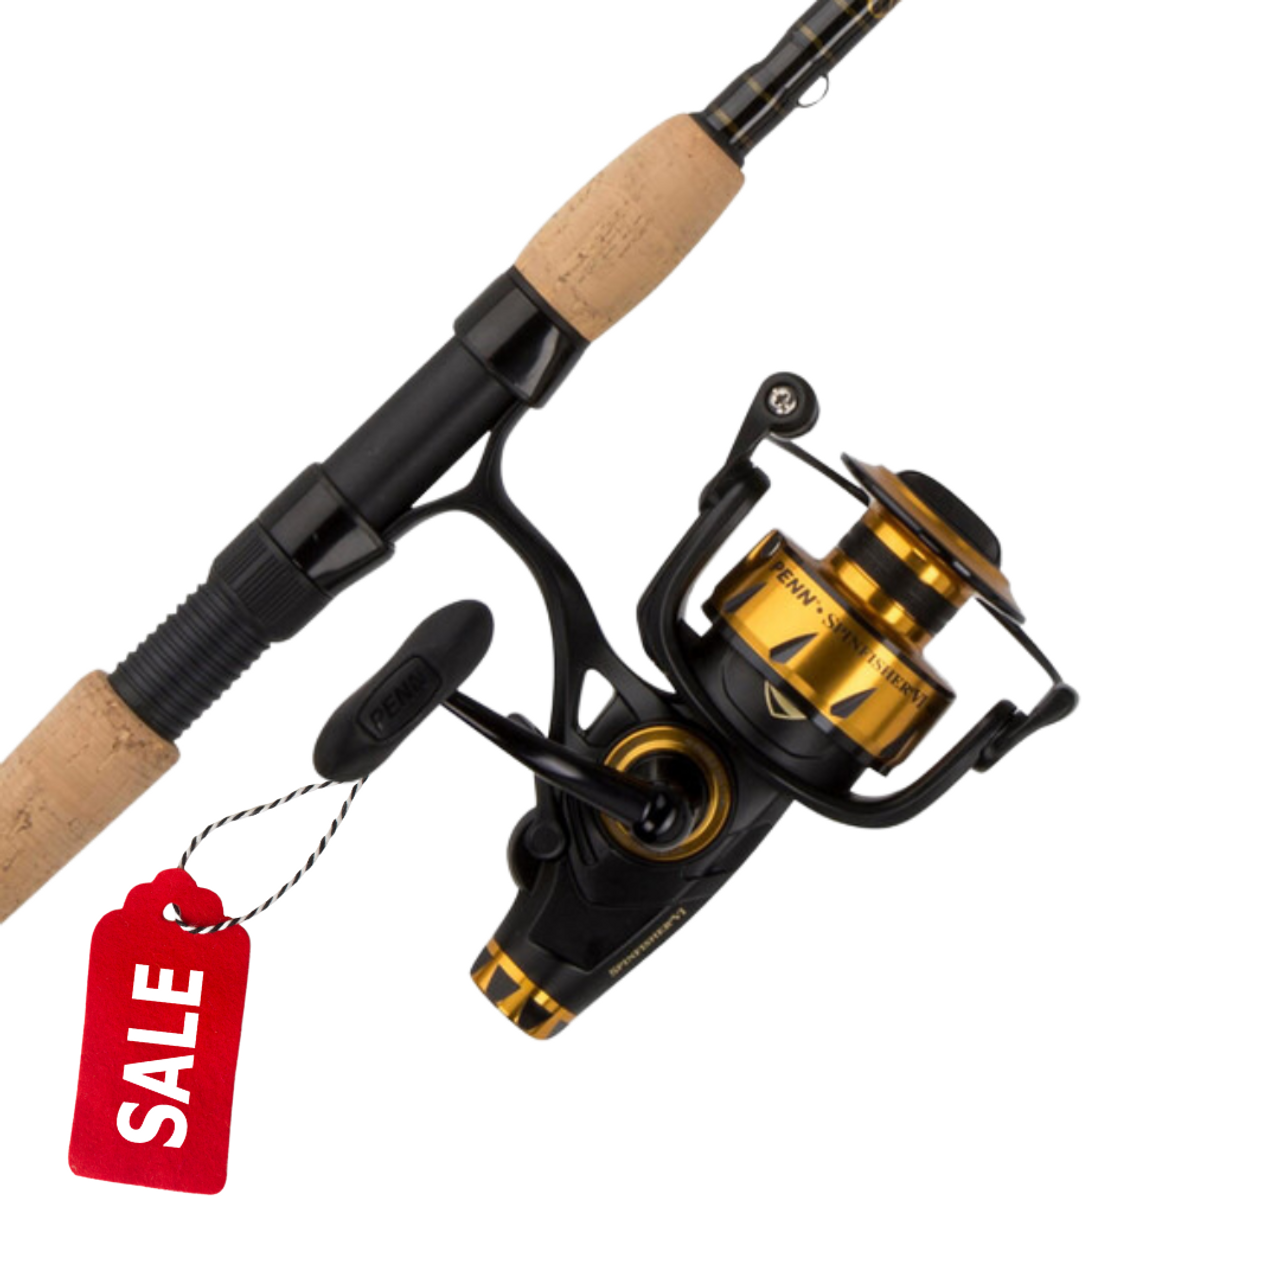 Penn Spinfisher VI Combo 5500 with 8' MH 2-Piece Rod Combo - SSVI5500802MH  from PENN - CHAOS Fishing